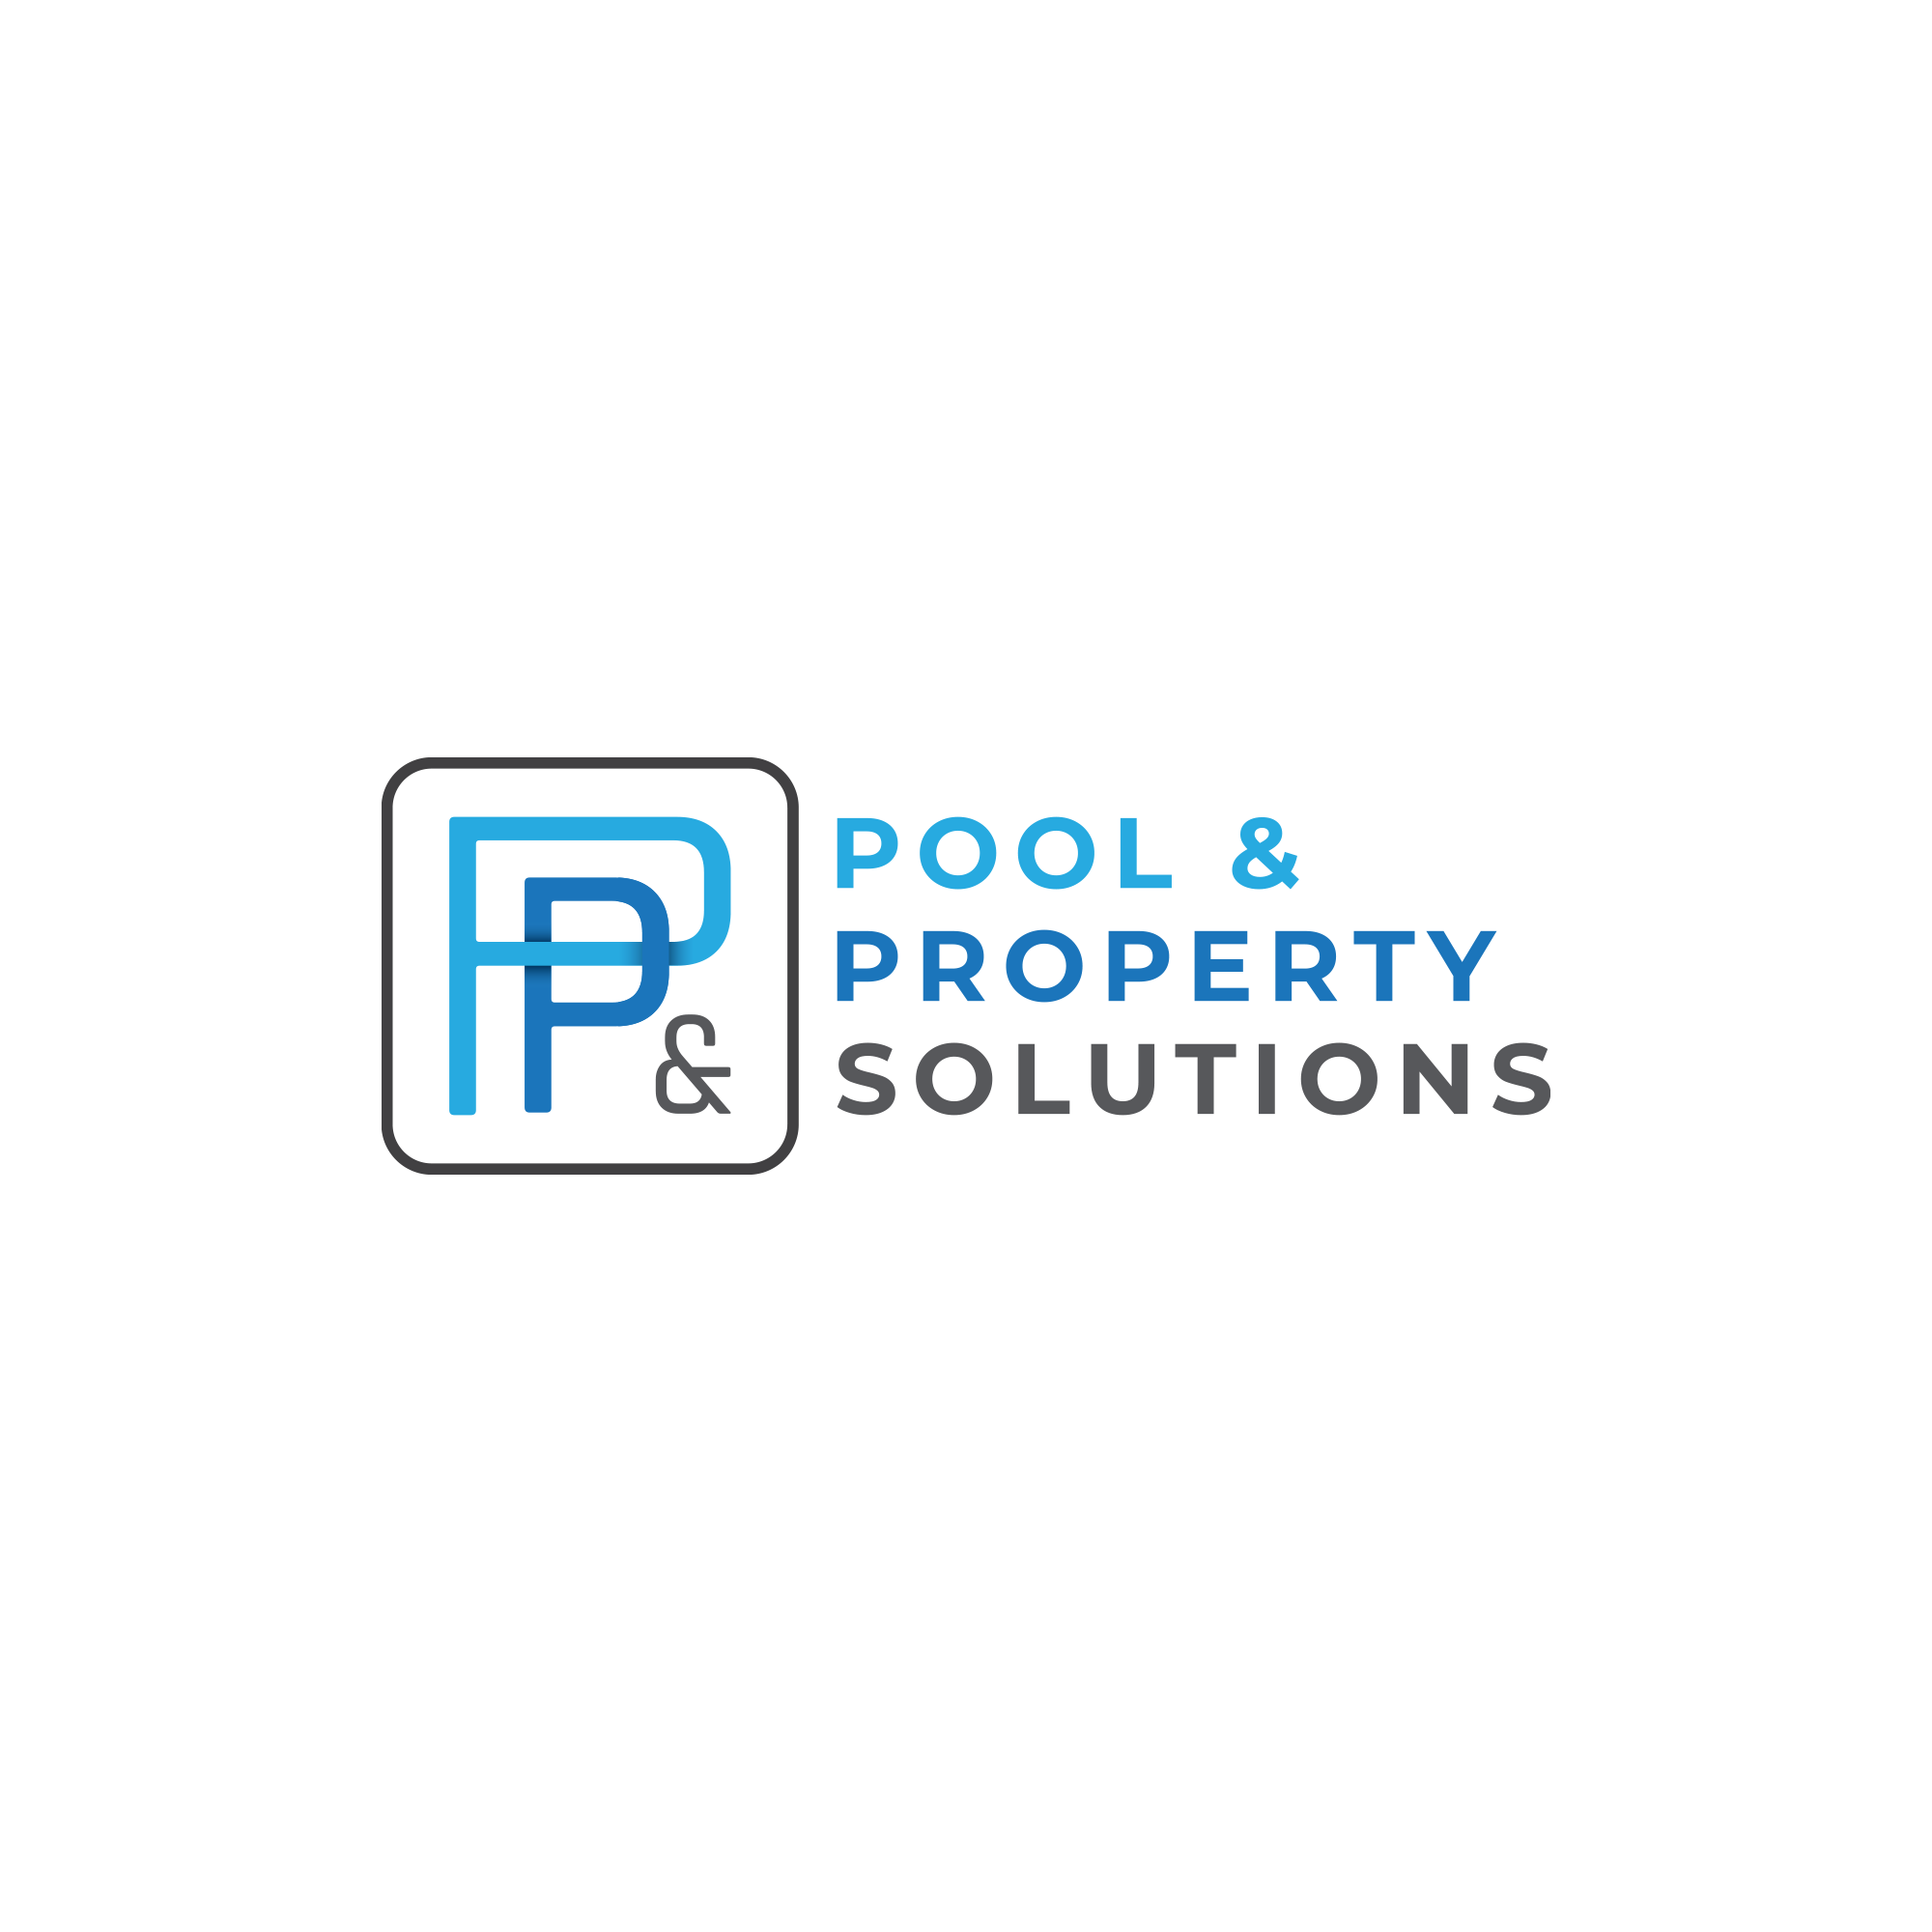 Pool and Property Solutions A-78072_hmk_6-3 Someone loved us so much they wrote a short story about Pool & Property Solutions  